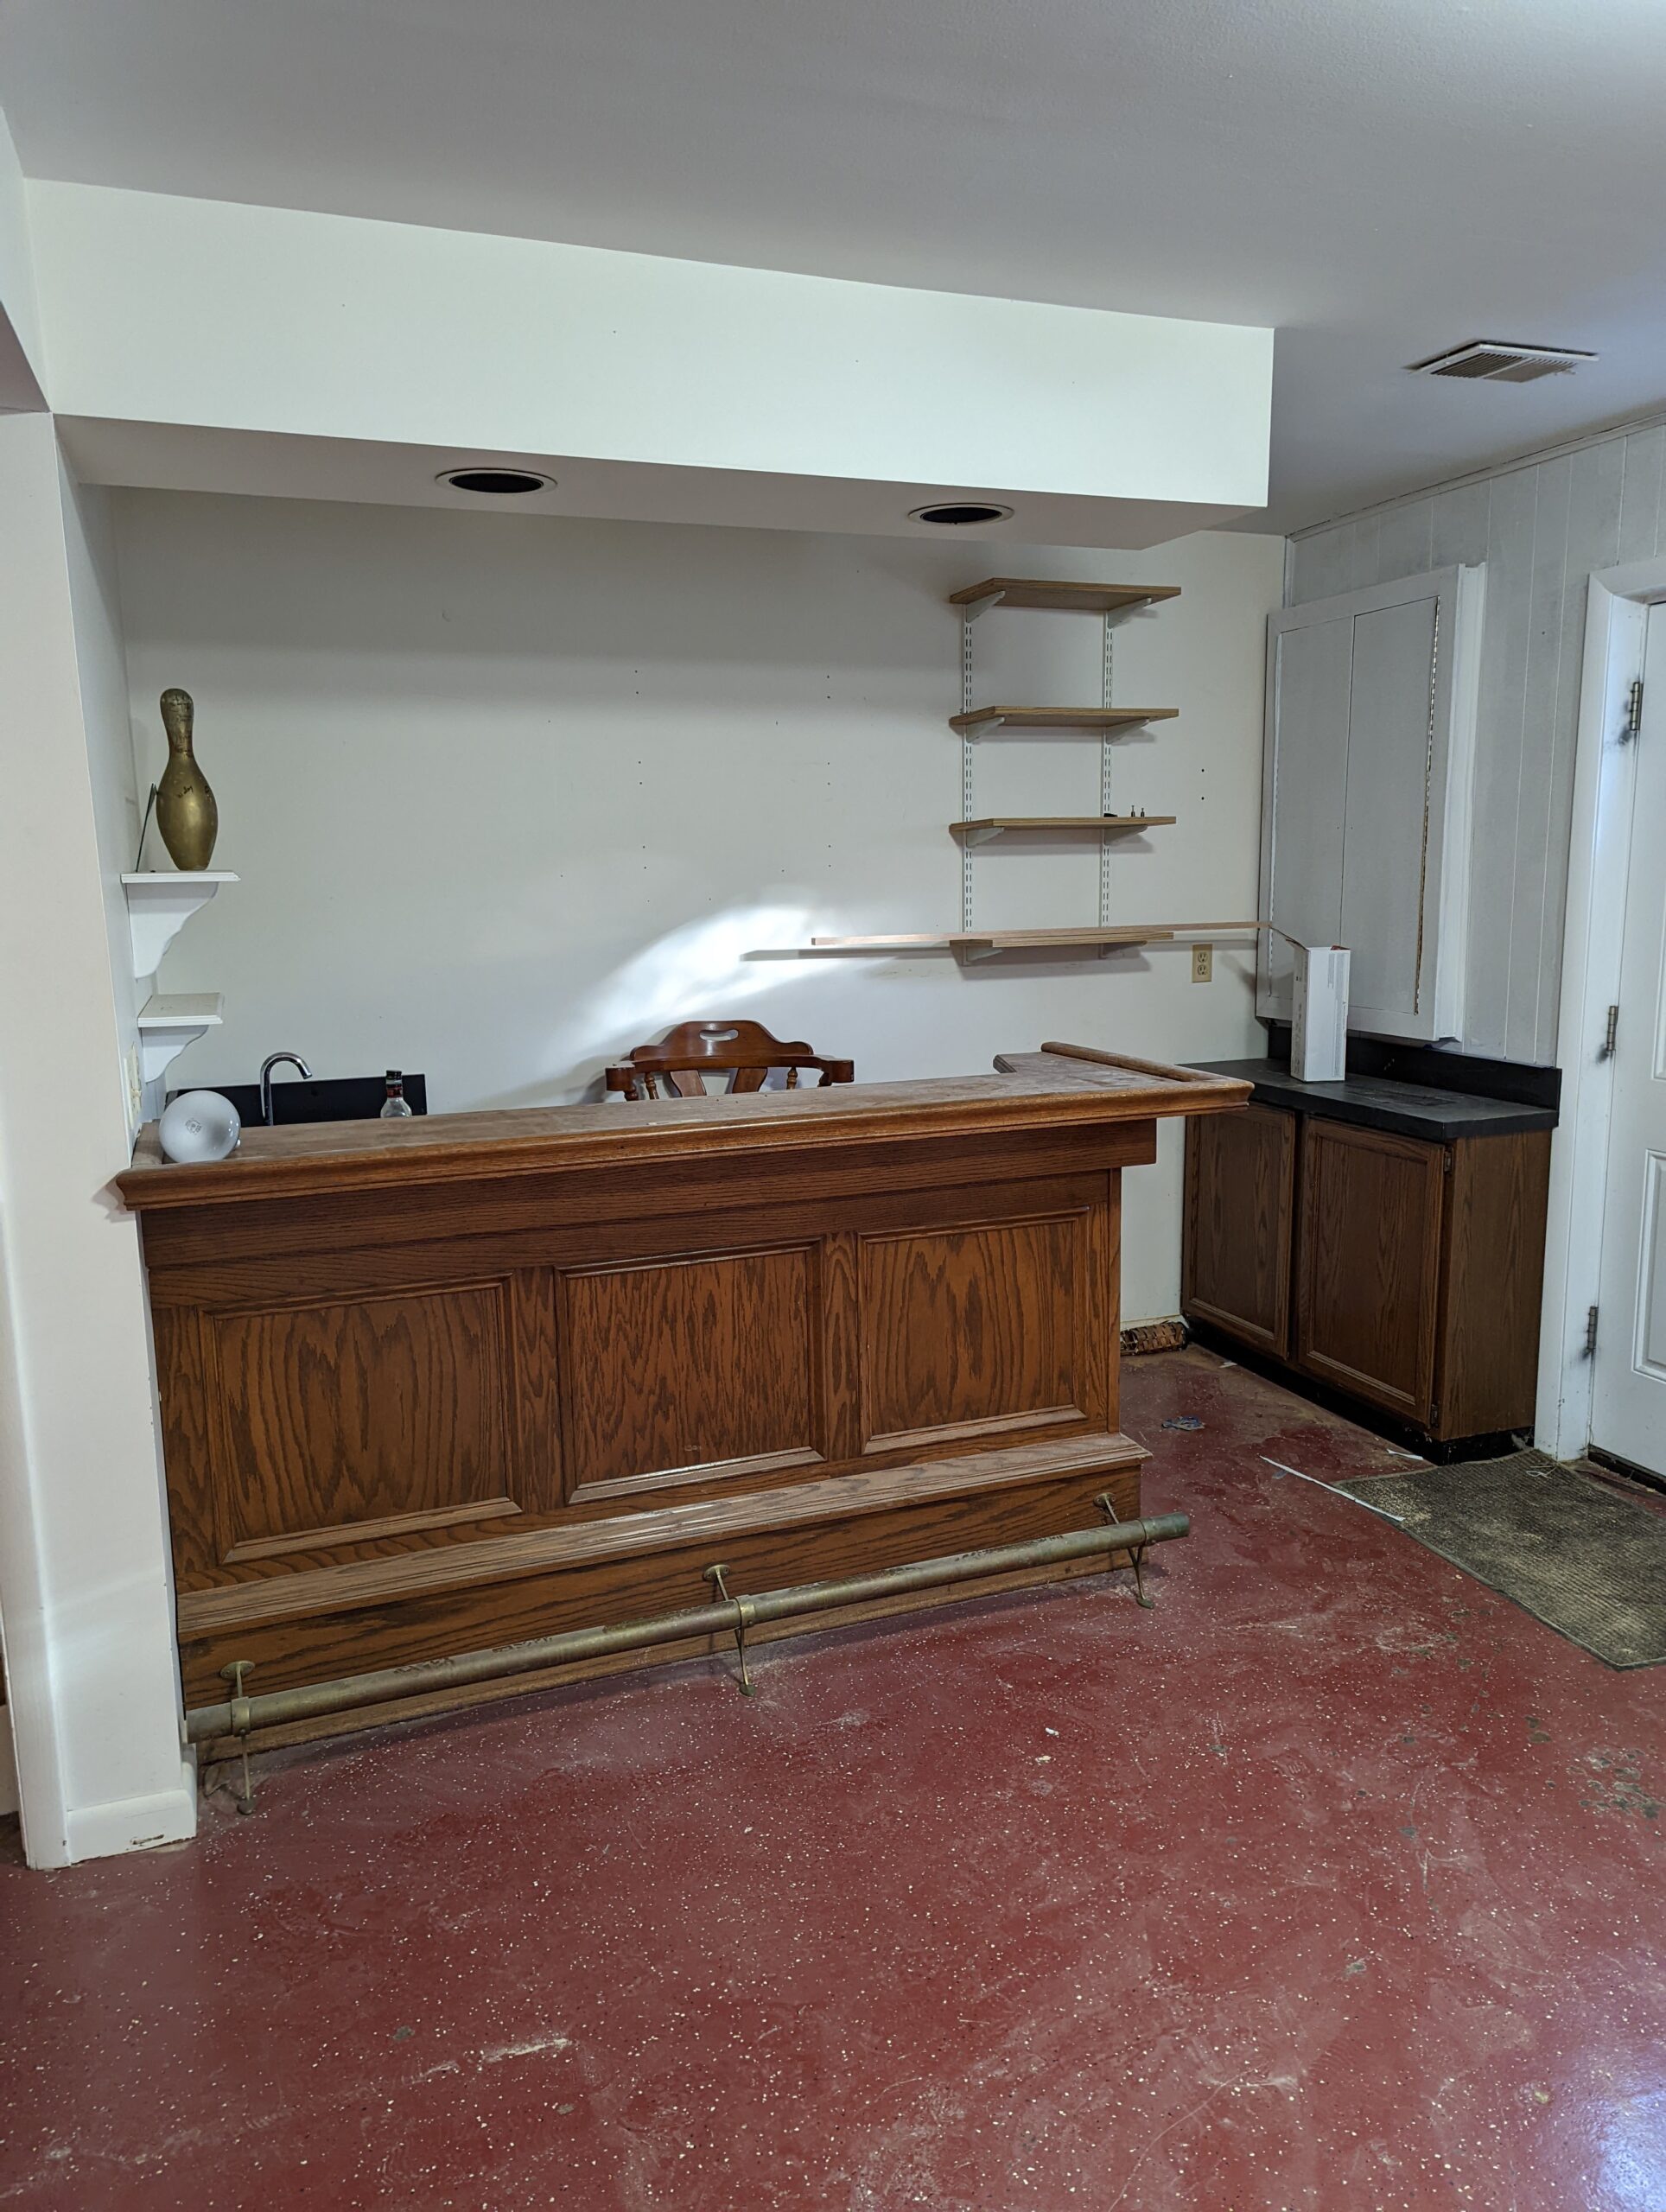 cellphone photo of 3482 Mildred Dr, Falls Church Virginia - showing the before photo of the basement corner bar